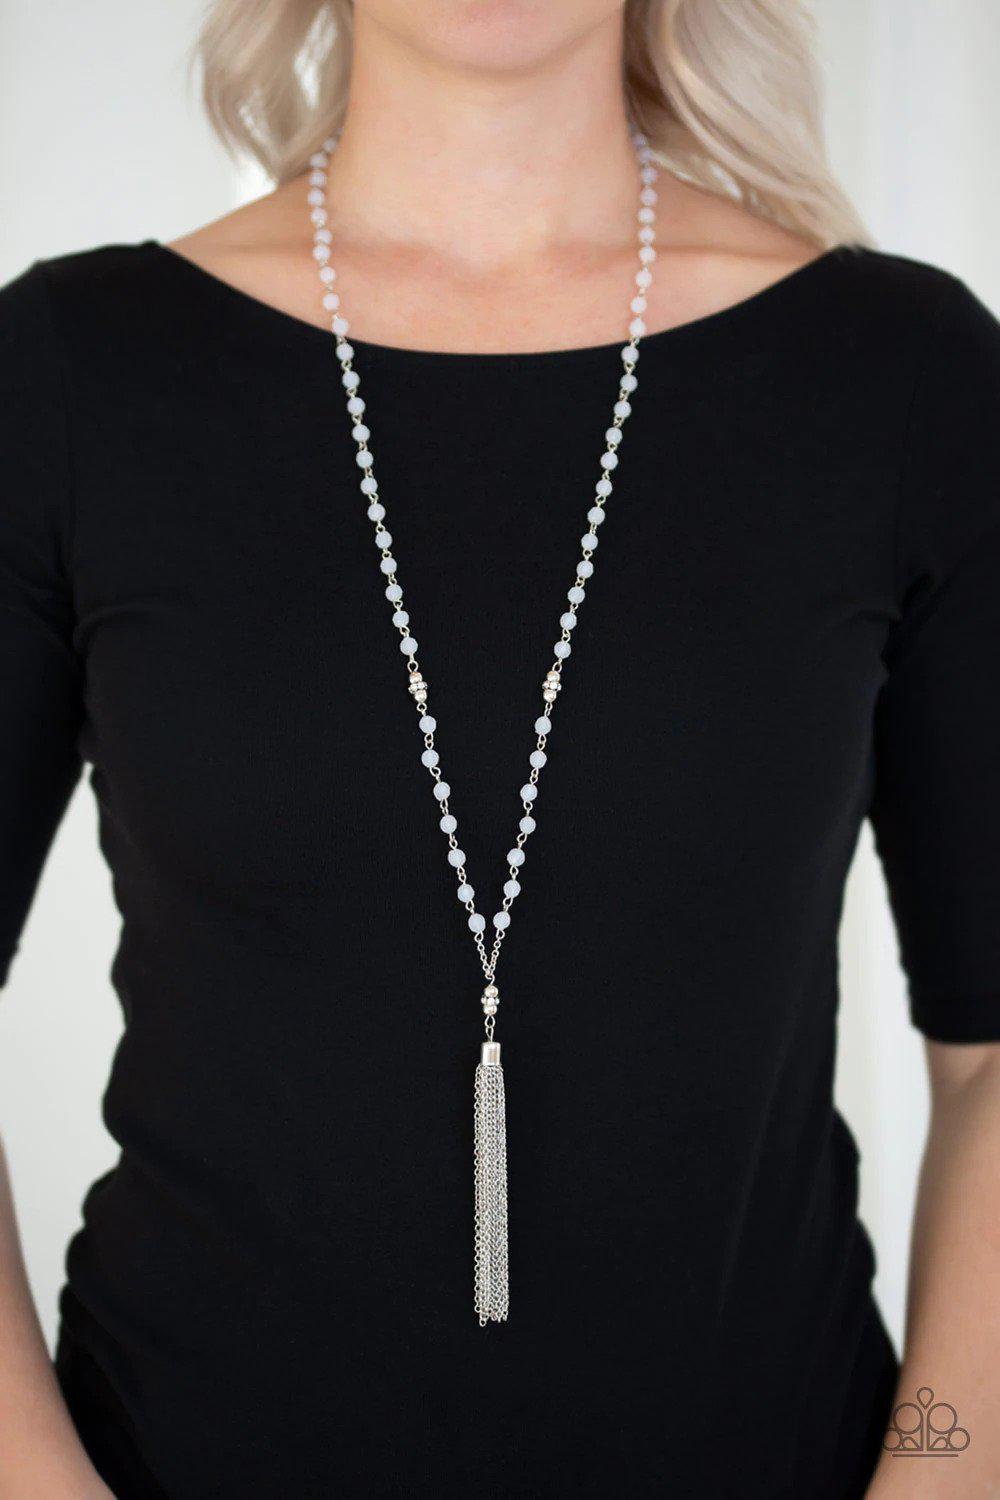 Tassel Takeover White Necklace - Paparazzi Accessories- on model - CarasShop.com - $5 Jewelry by Cara Jewels